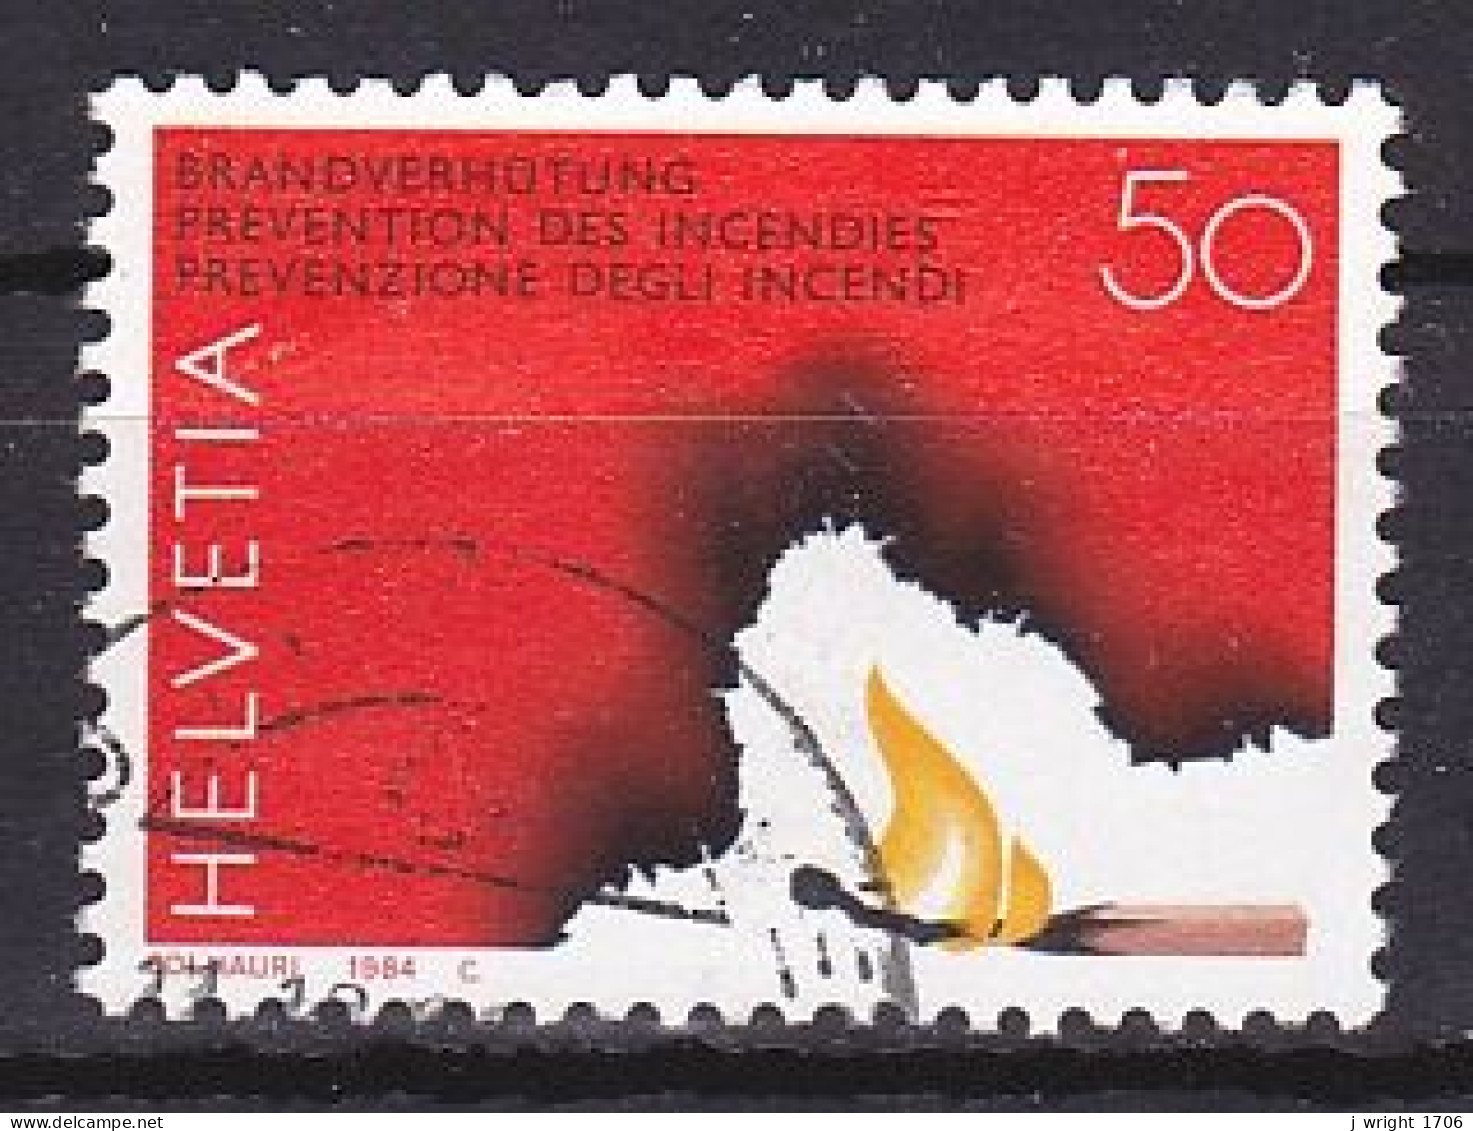 Switzerland, 1984, Publicity Issue/Fire Prevention, 50c, USED - Used Stamps